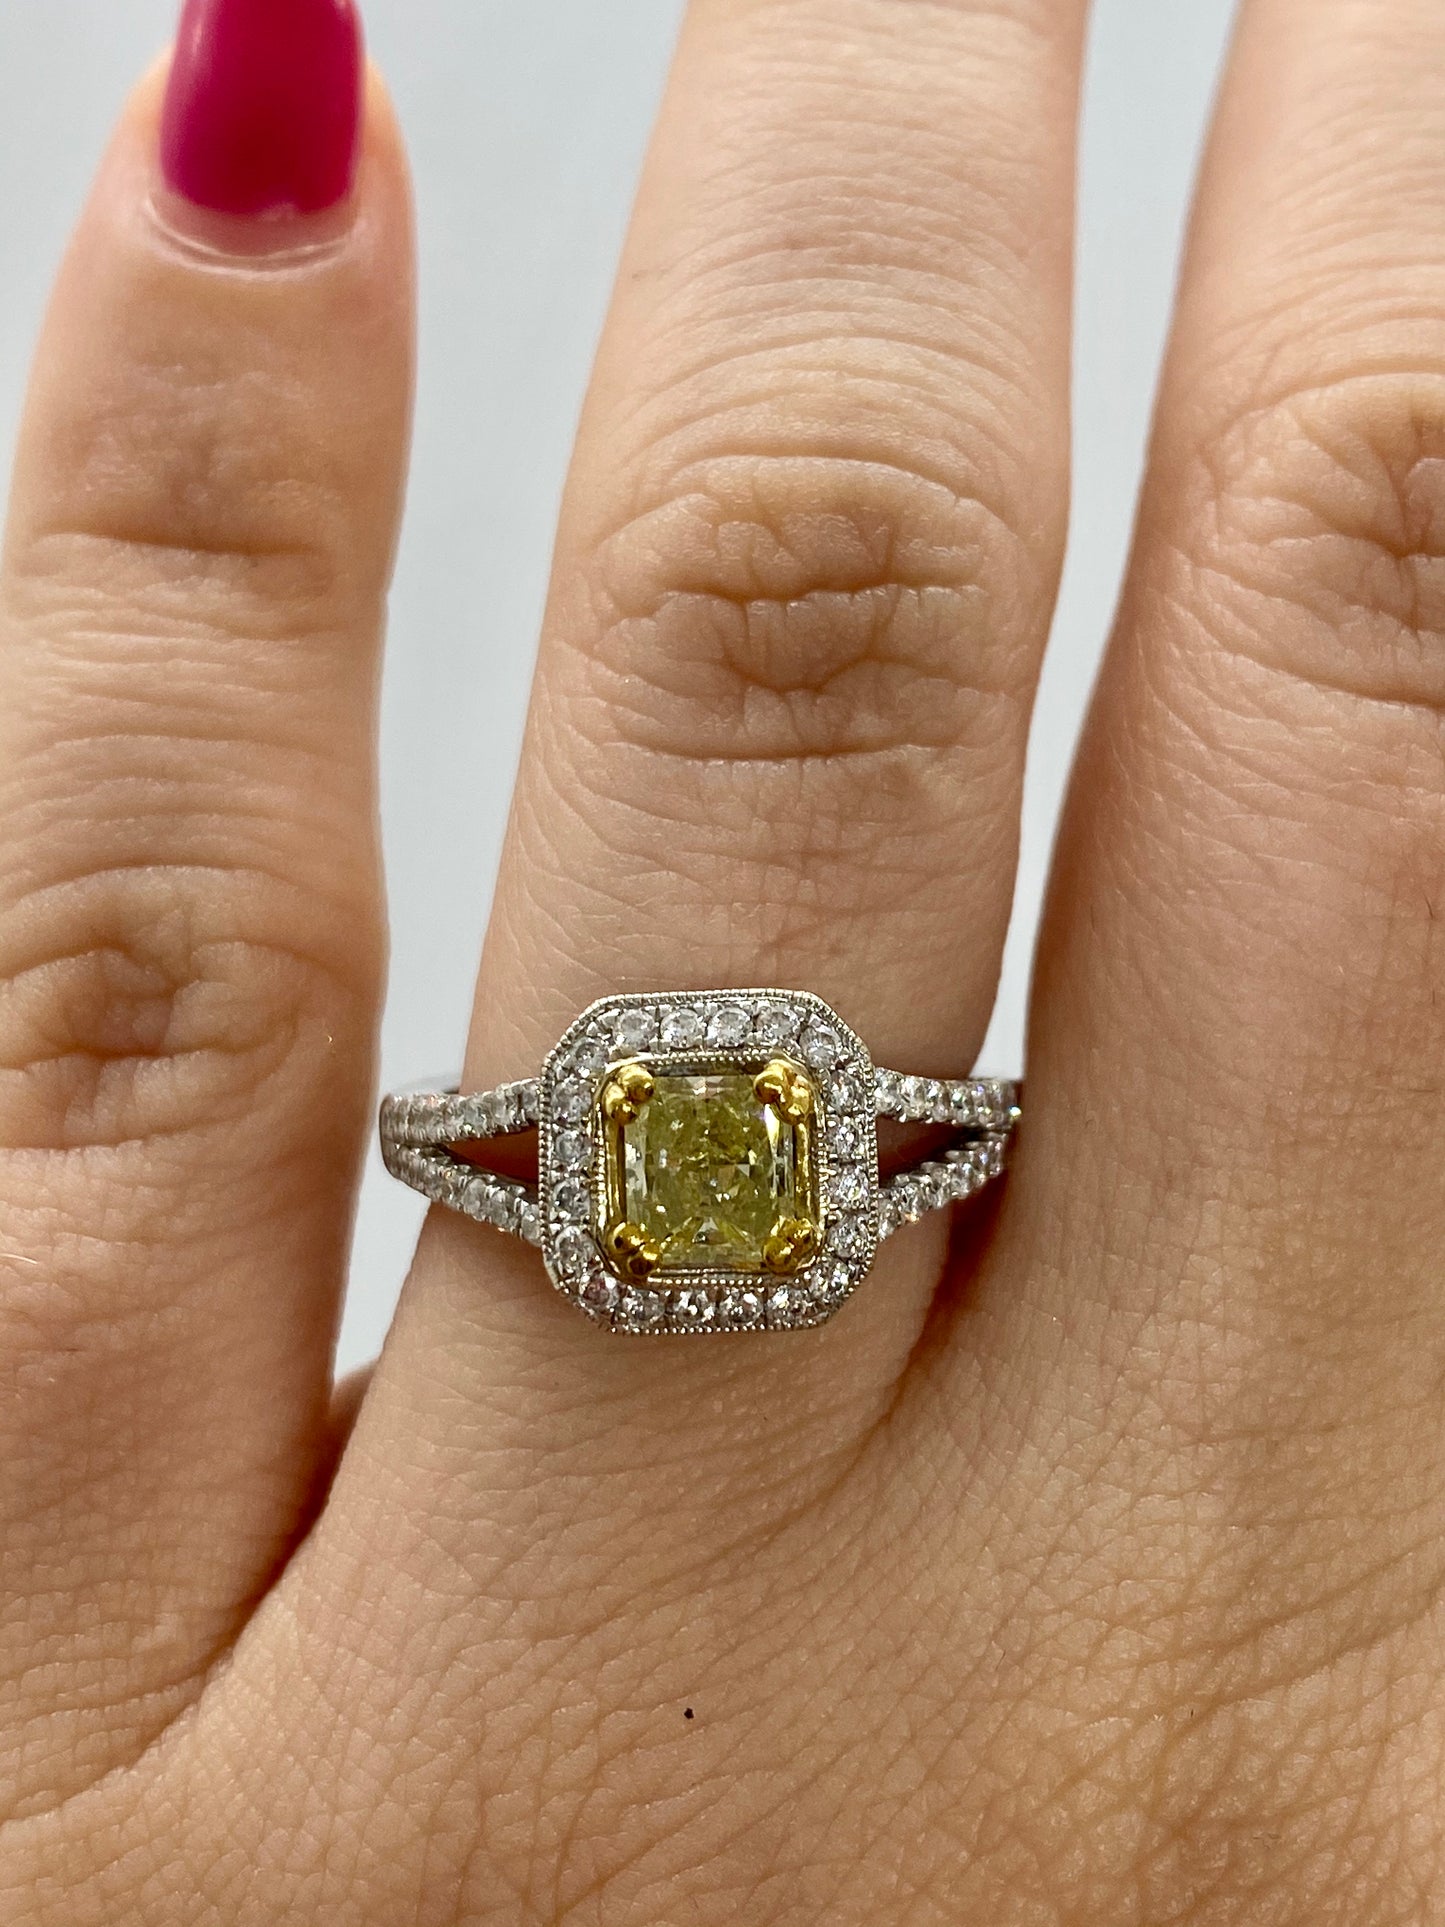 Yellow Diamond Ring R06543 - Royal Gems and Jewelry